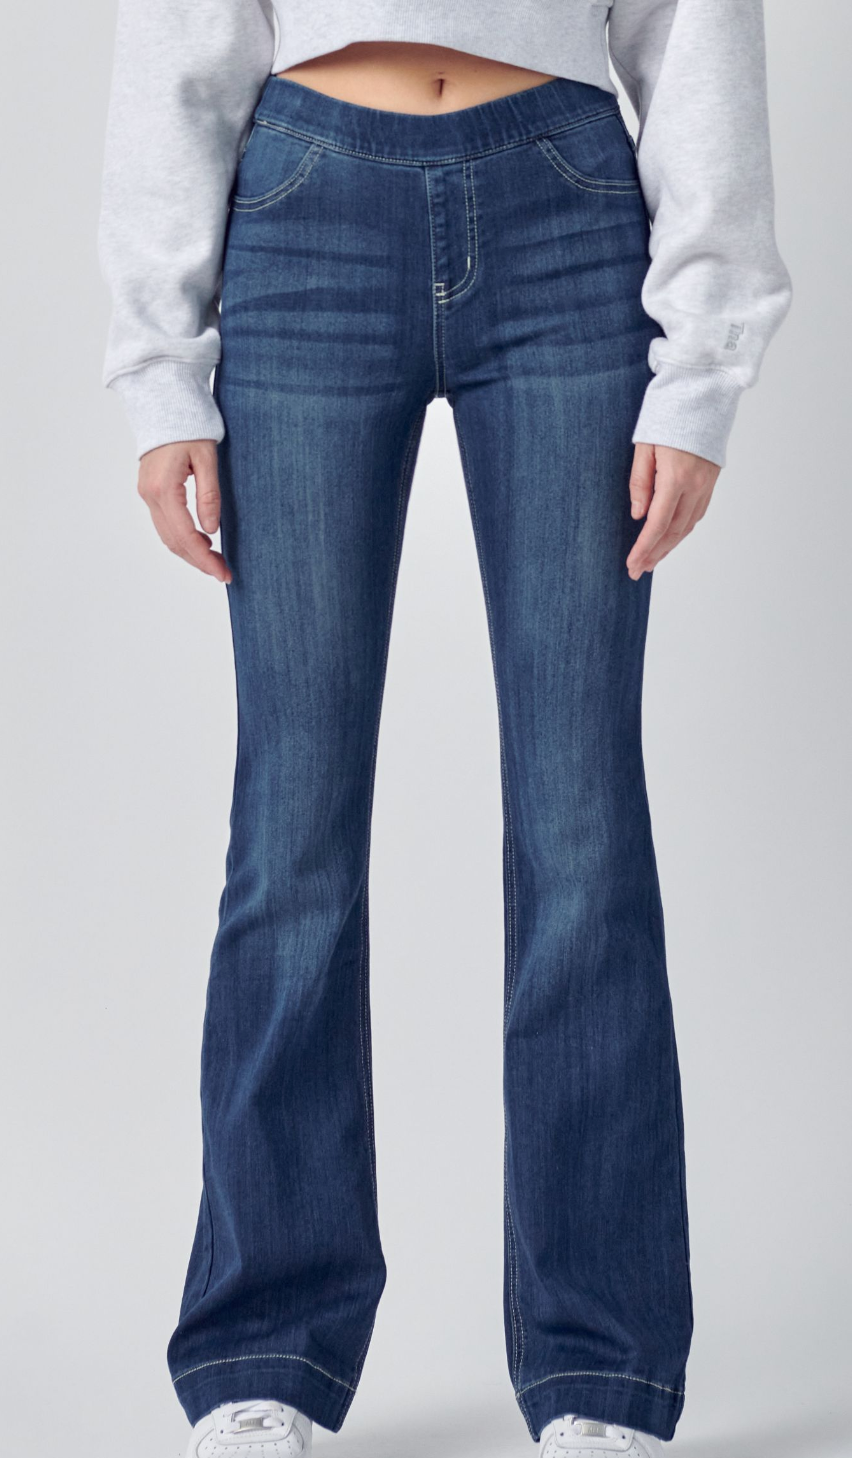 Daisy Denim Flared Pull On Jeans